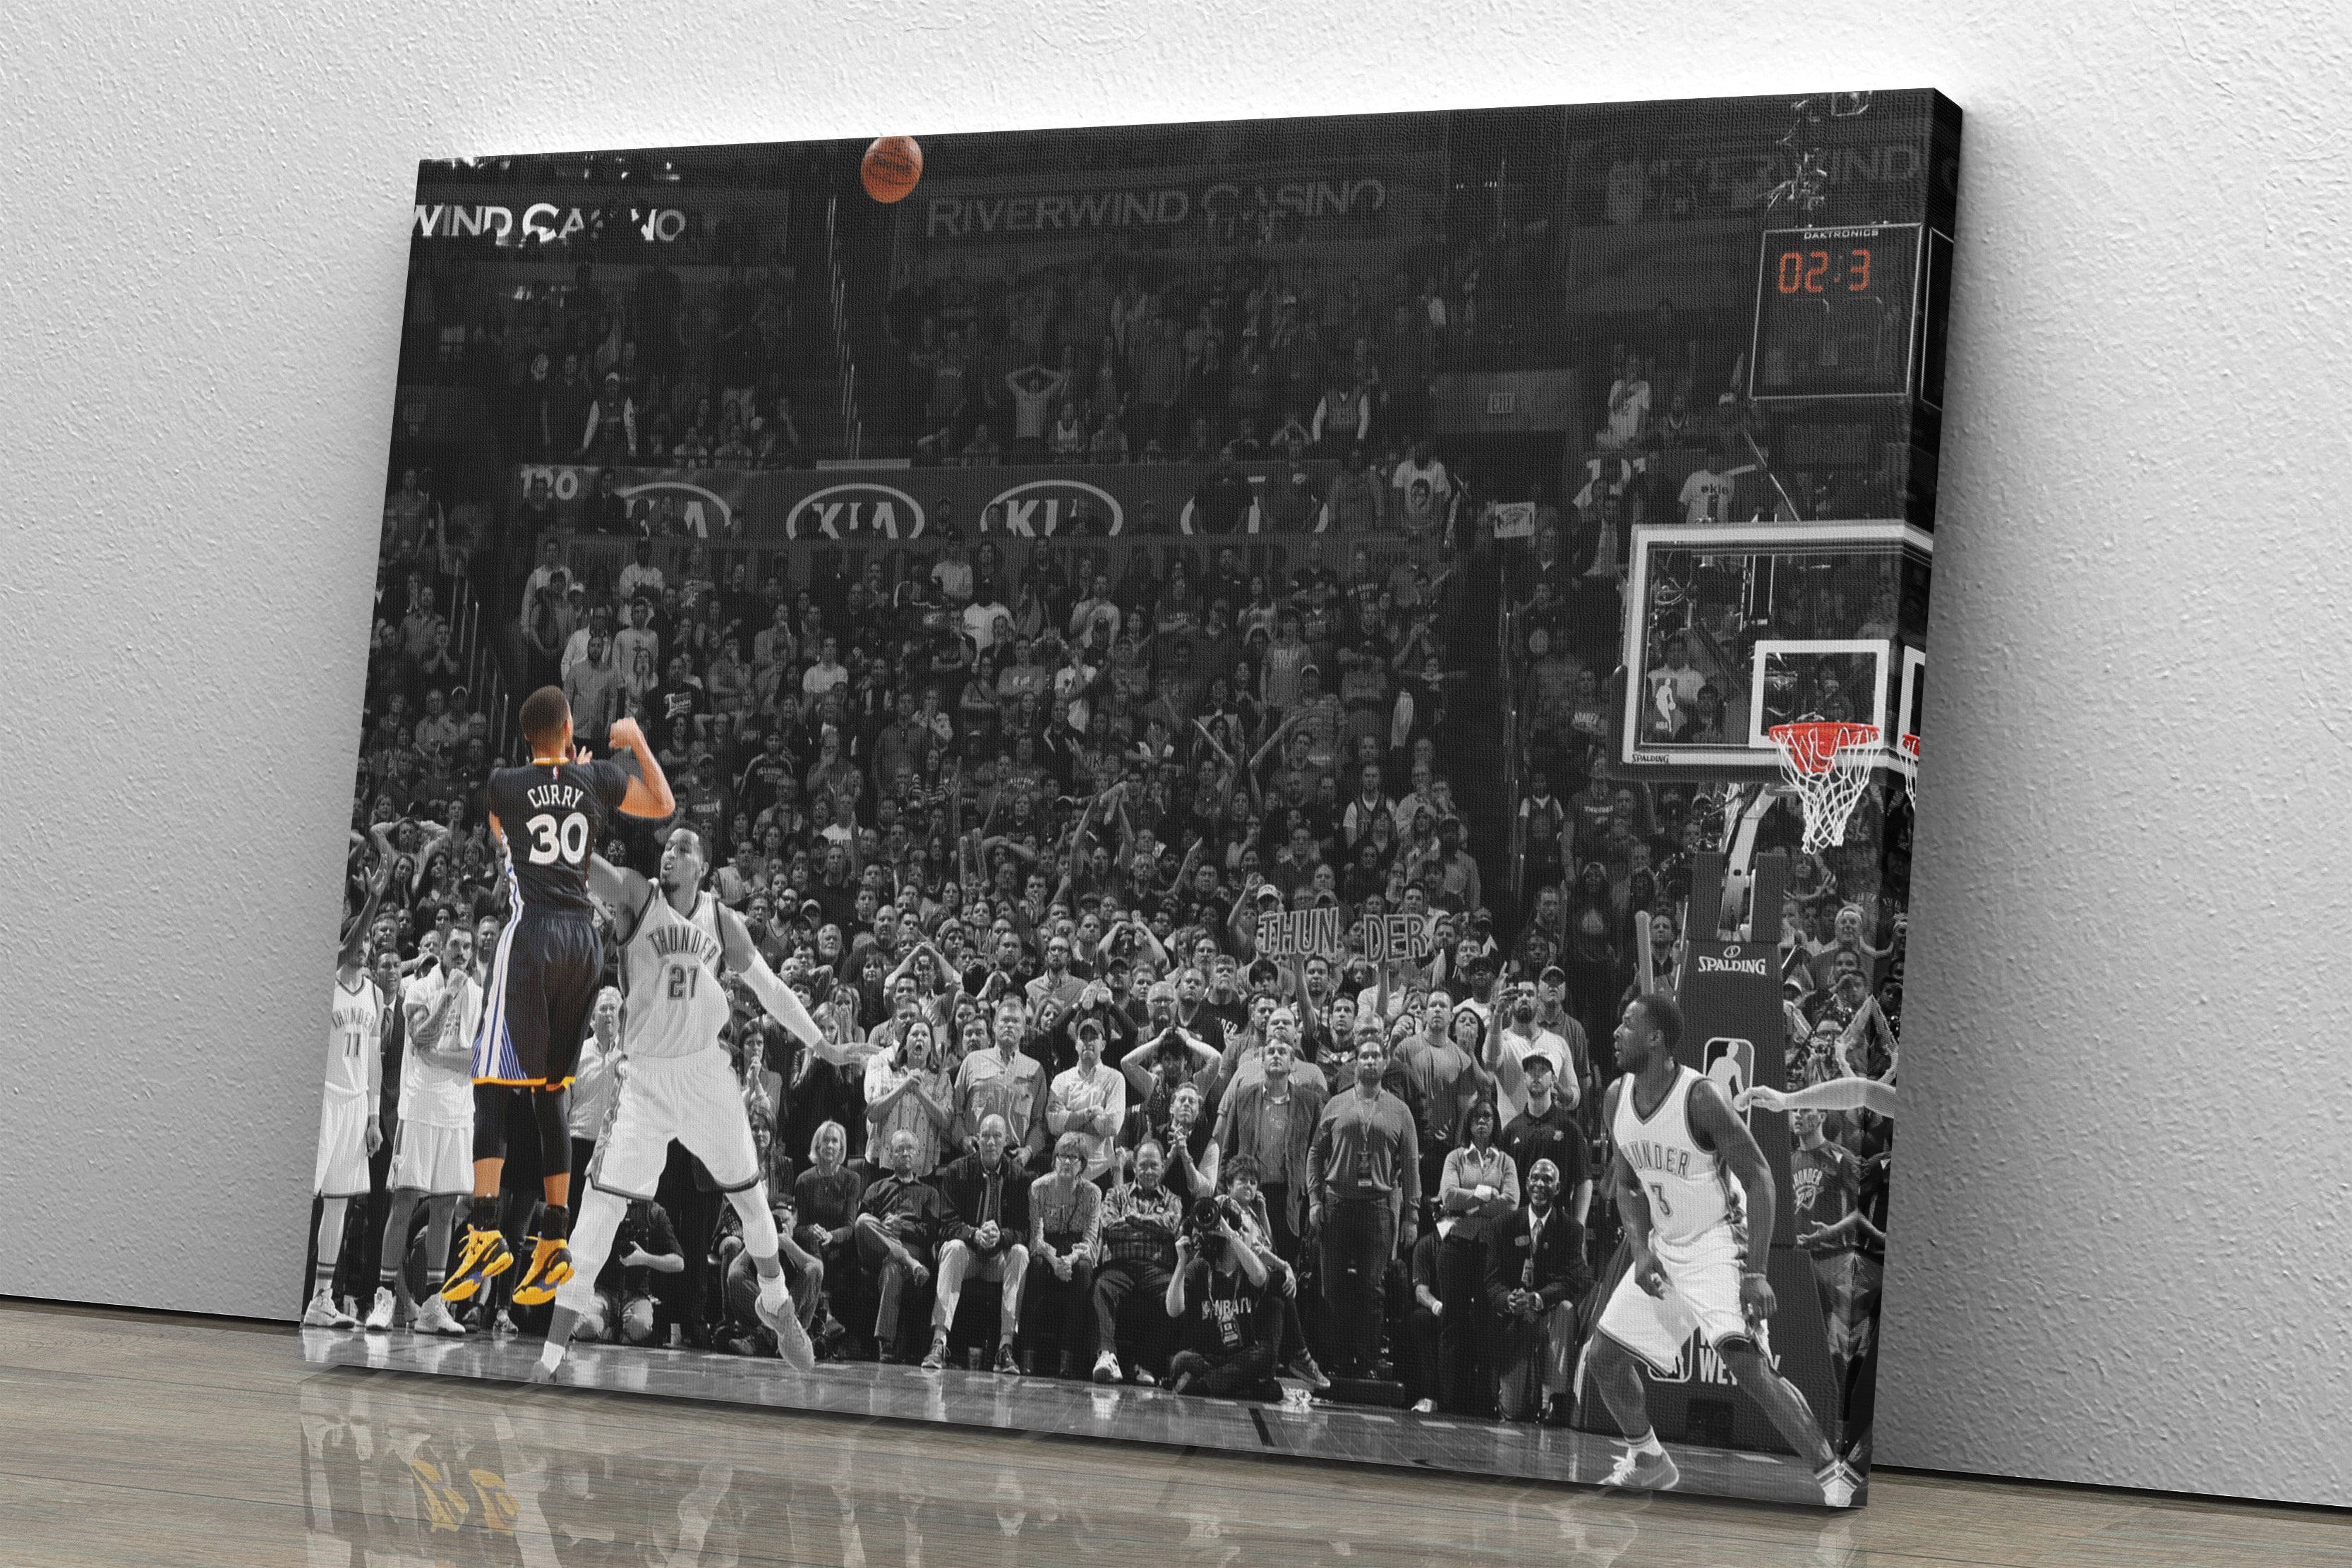 Stephen Curry Poster Golden State Warriors Canvas Print 